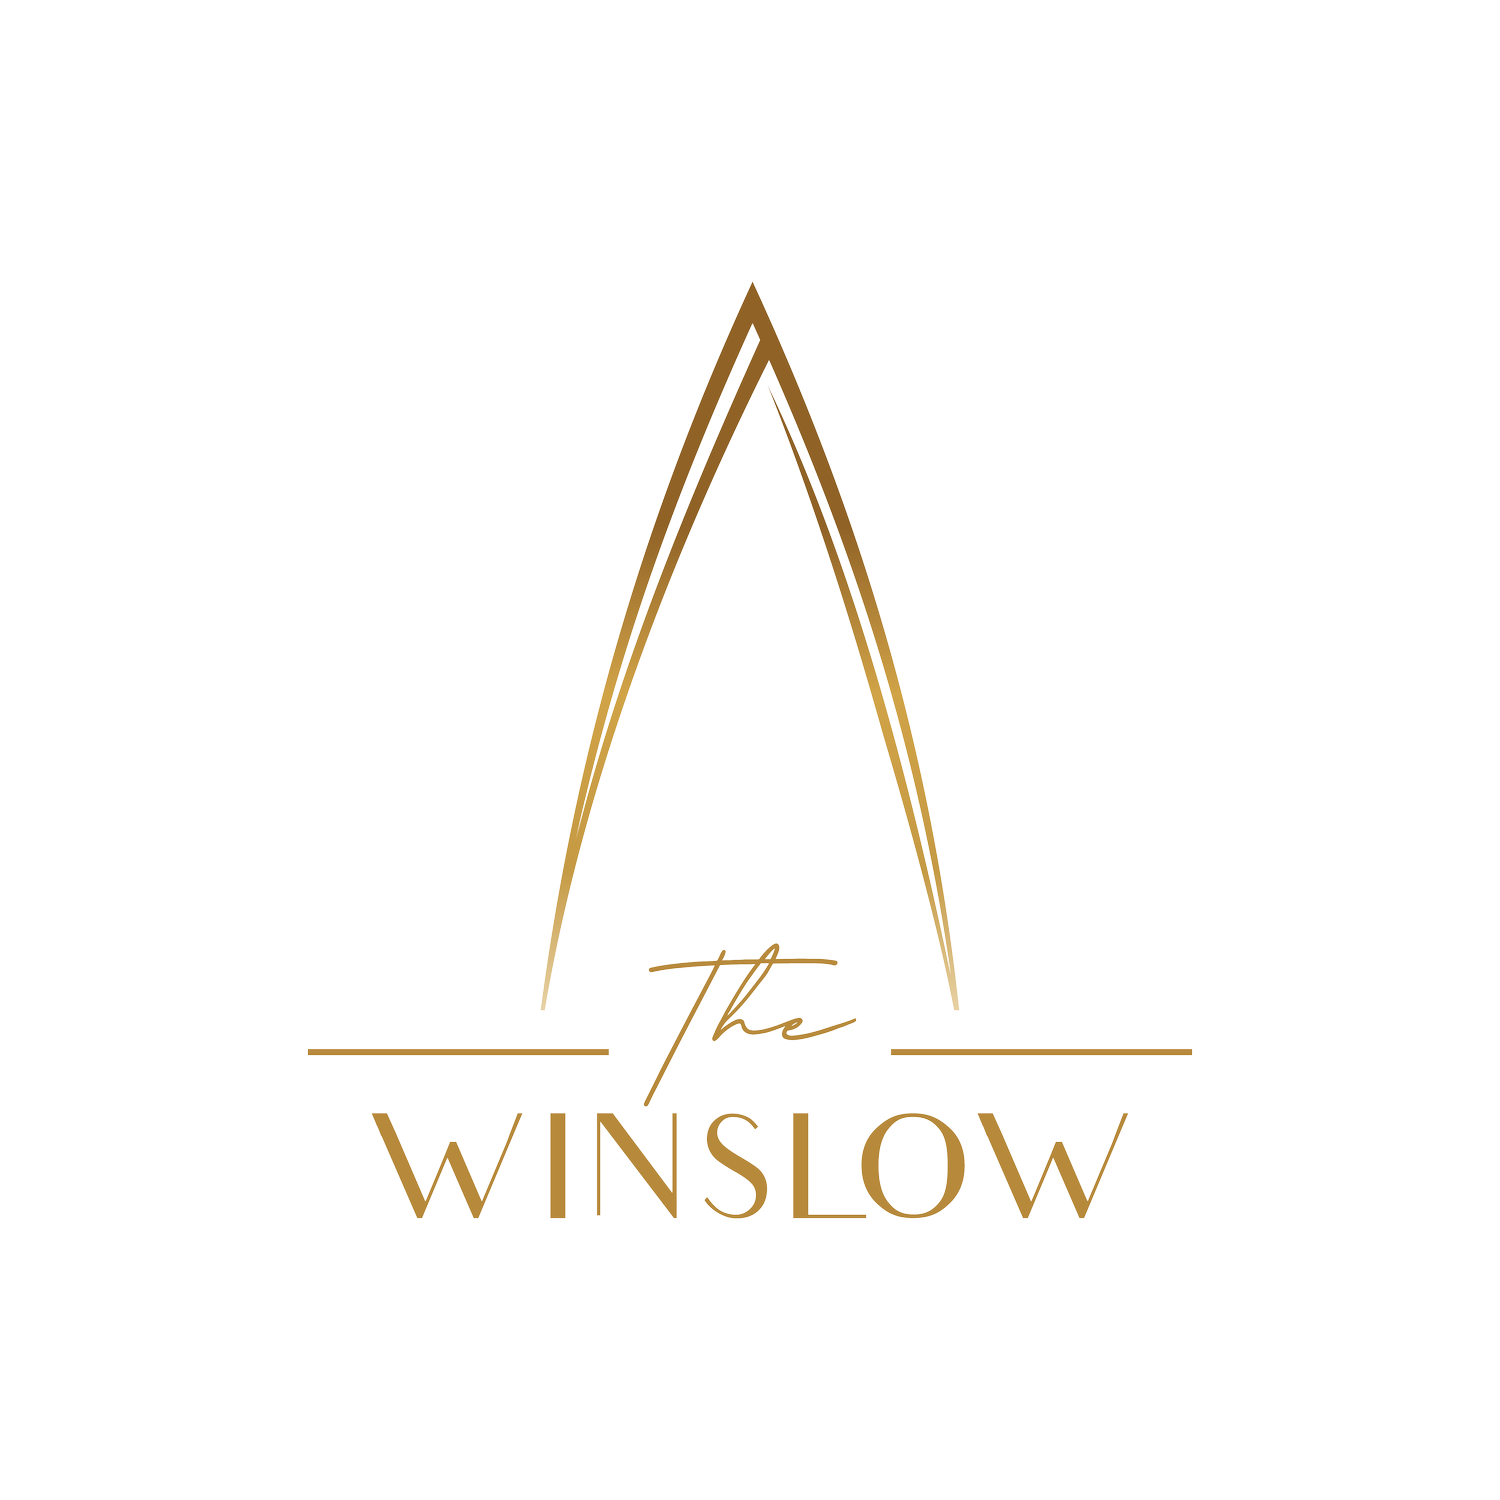 The Winslow